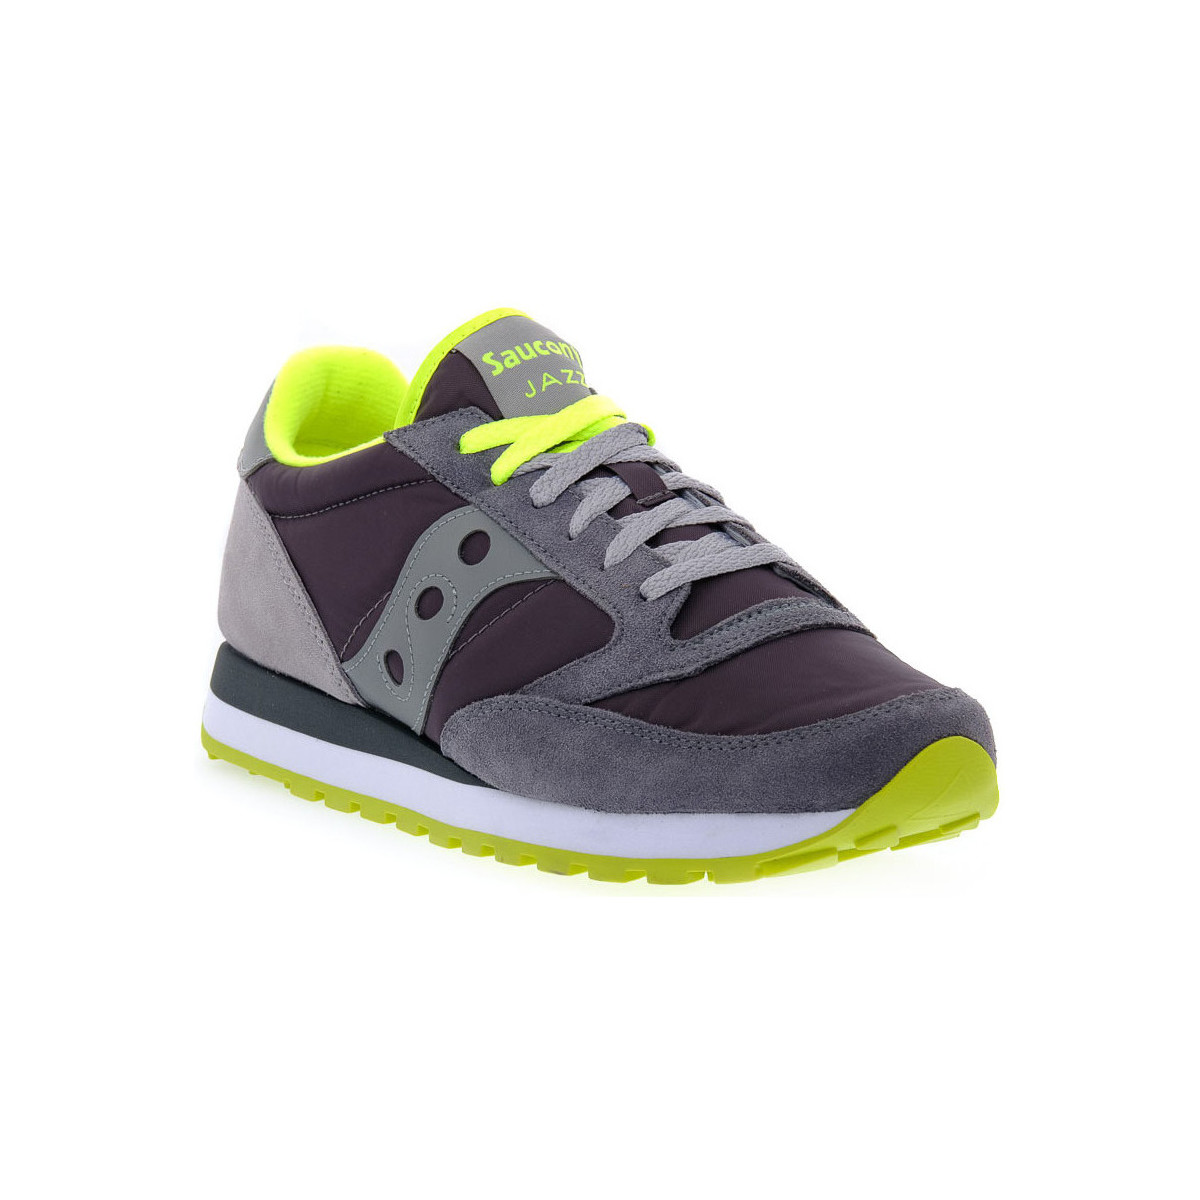 Chaussures Homme Baskets mode Saucony JAZZ PAVEMENT Gris